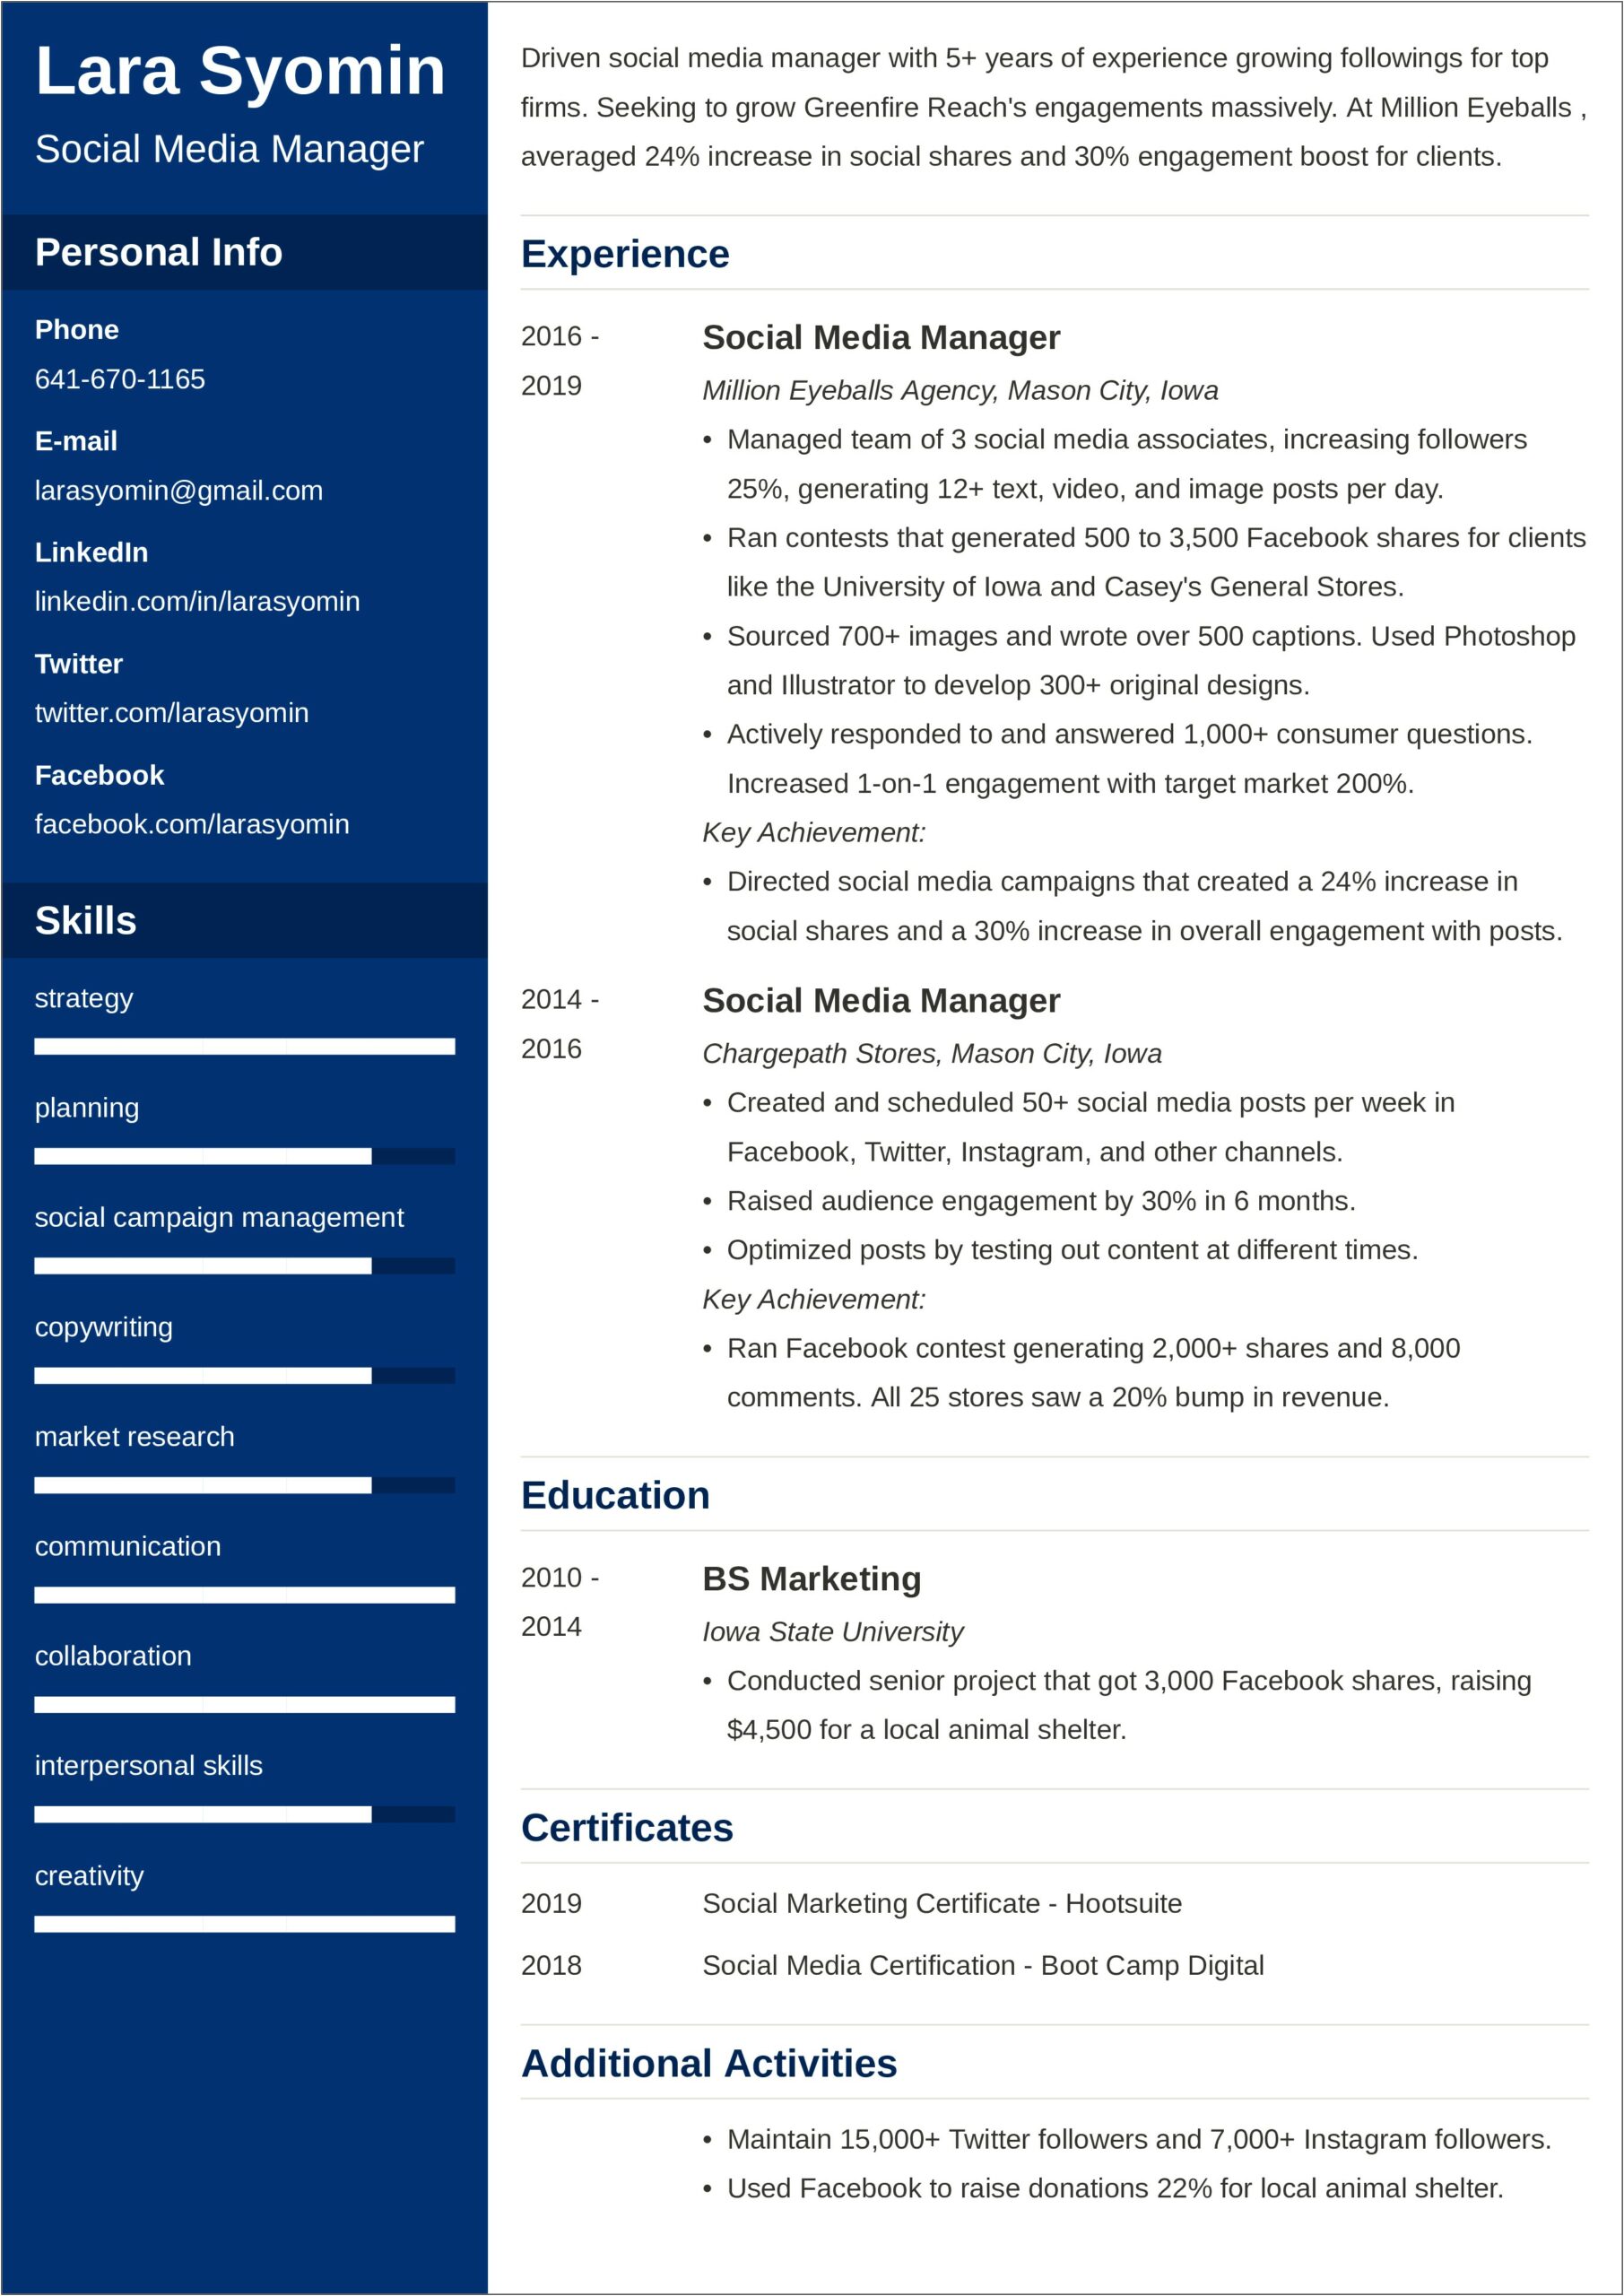 Skills To List For A Marketing Resume